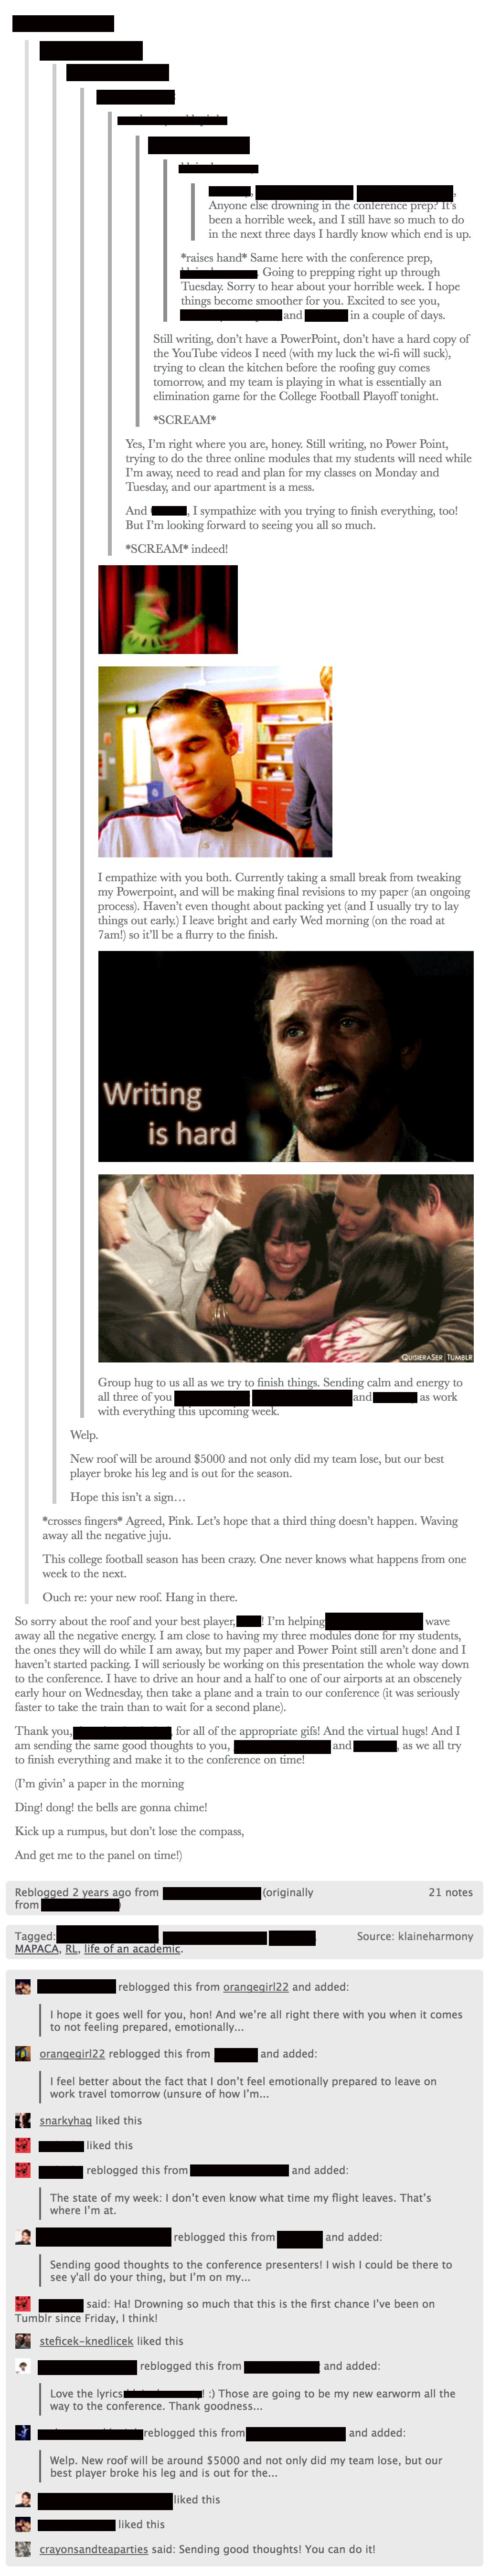 Tumblr screenshot. A long text post conversation among the authors expressing stress about the upcoming panel and our own papers, as well as other personal and professional stressors. One of the authors posts several GIFs: a flailing Kermit, a frustrated Blaine Anderson, Chuck of Supernatural saying, writing is hard, and the New Directions of Glee<in a group hug. Following that is more encouragement and support. Below the conversation are notes, including from followers offering best wishes./></p>

<p class=